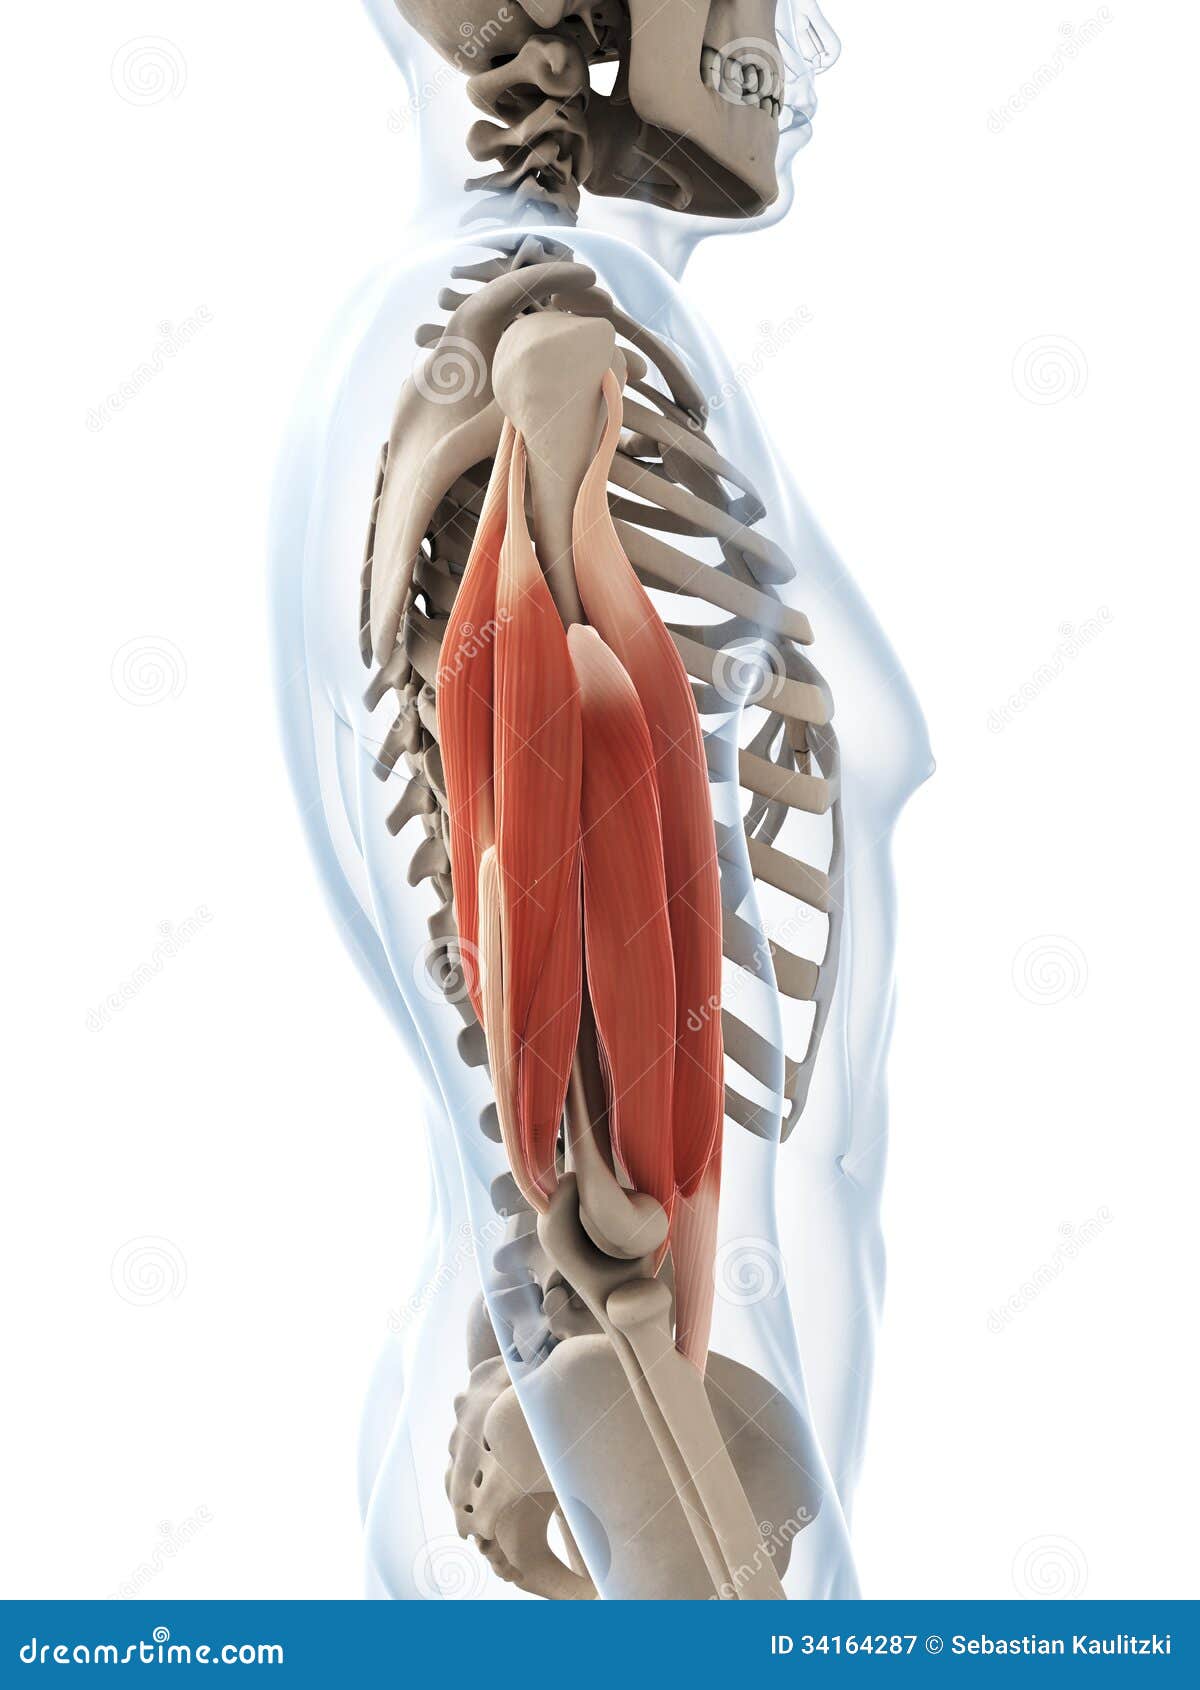 Upper Arm Muscle Stock Illustrations 246 Upper Arm Muscle Stock Illustrations Vectors Clipart Dreamstime